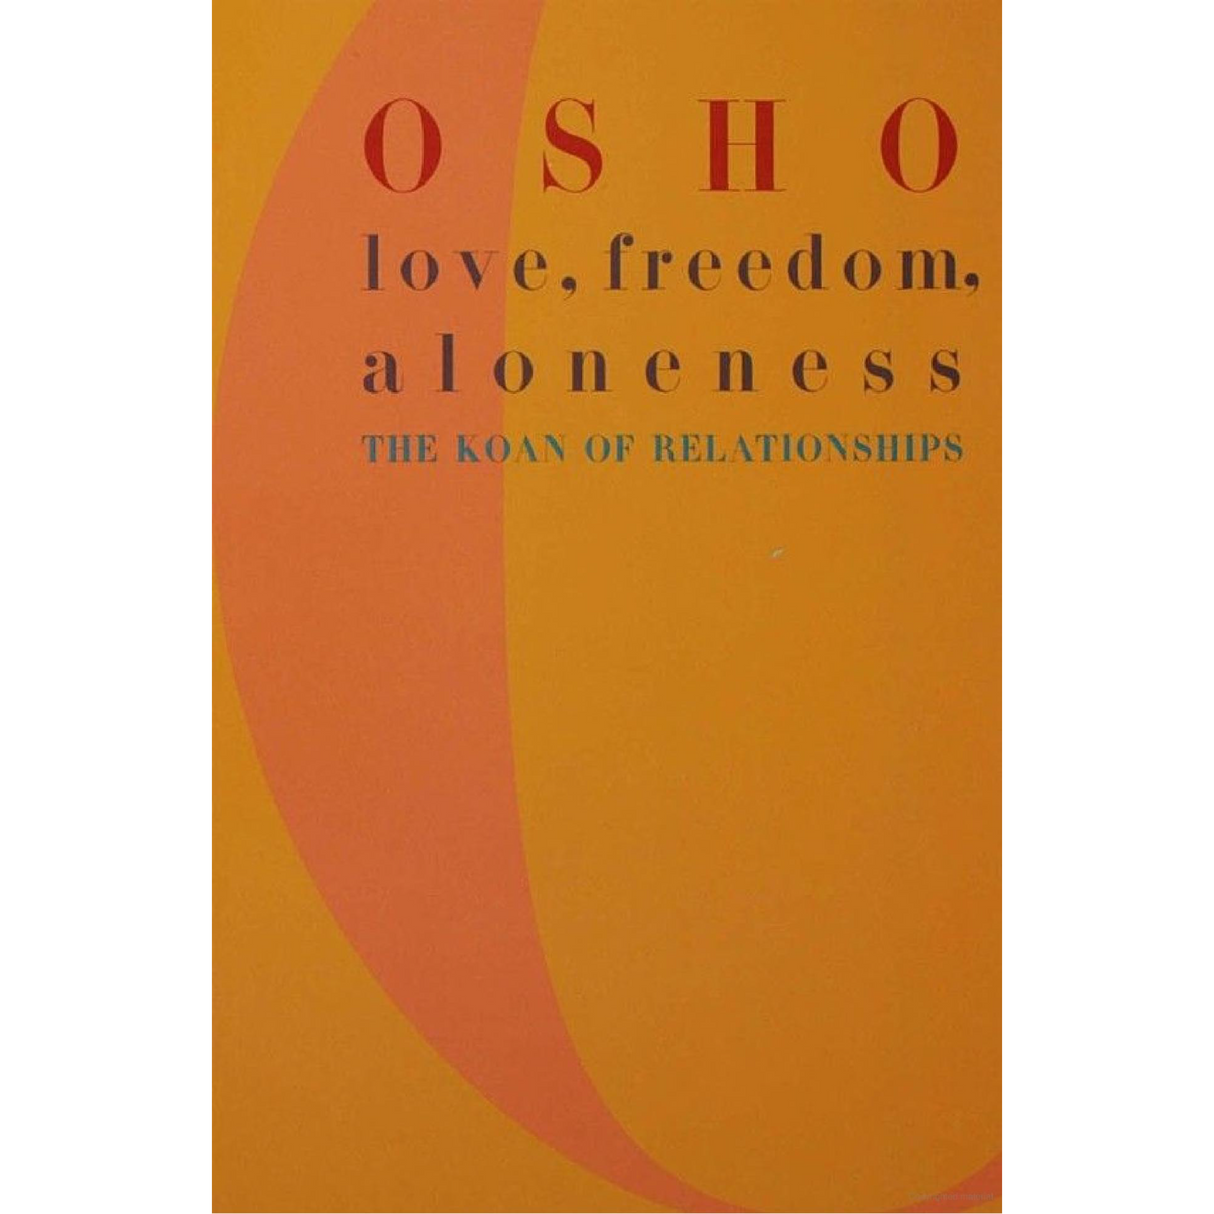 A Second Chance - OSHO Love, Freedom, and Aloneness Book - Delivery All Over Lebanon